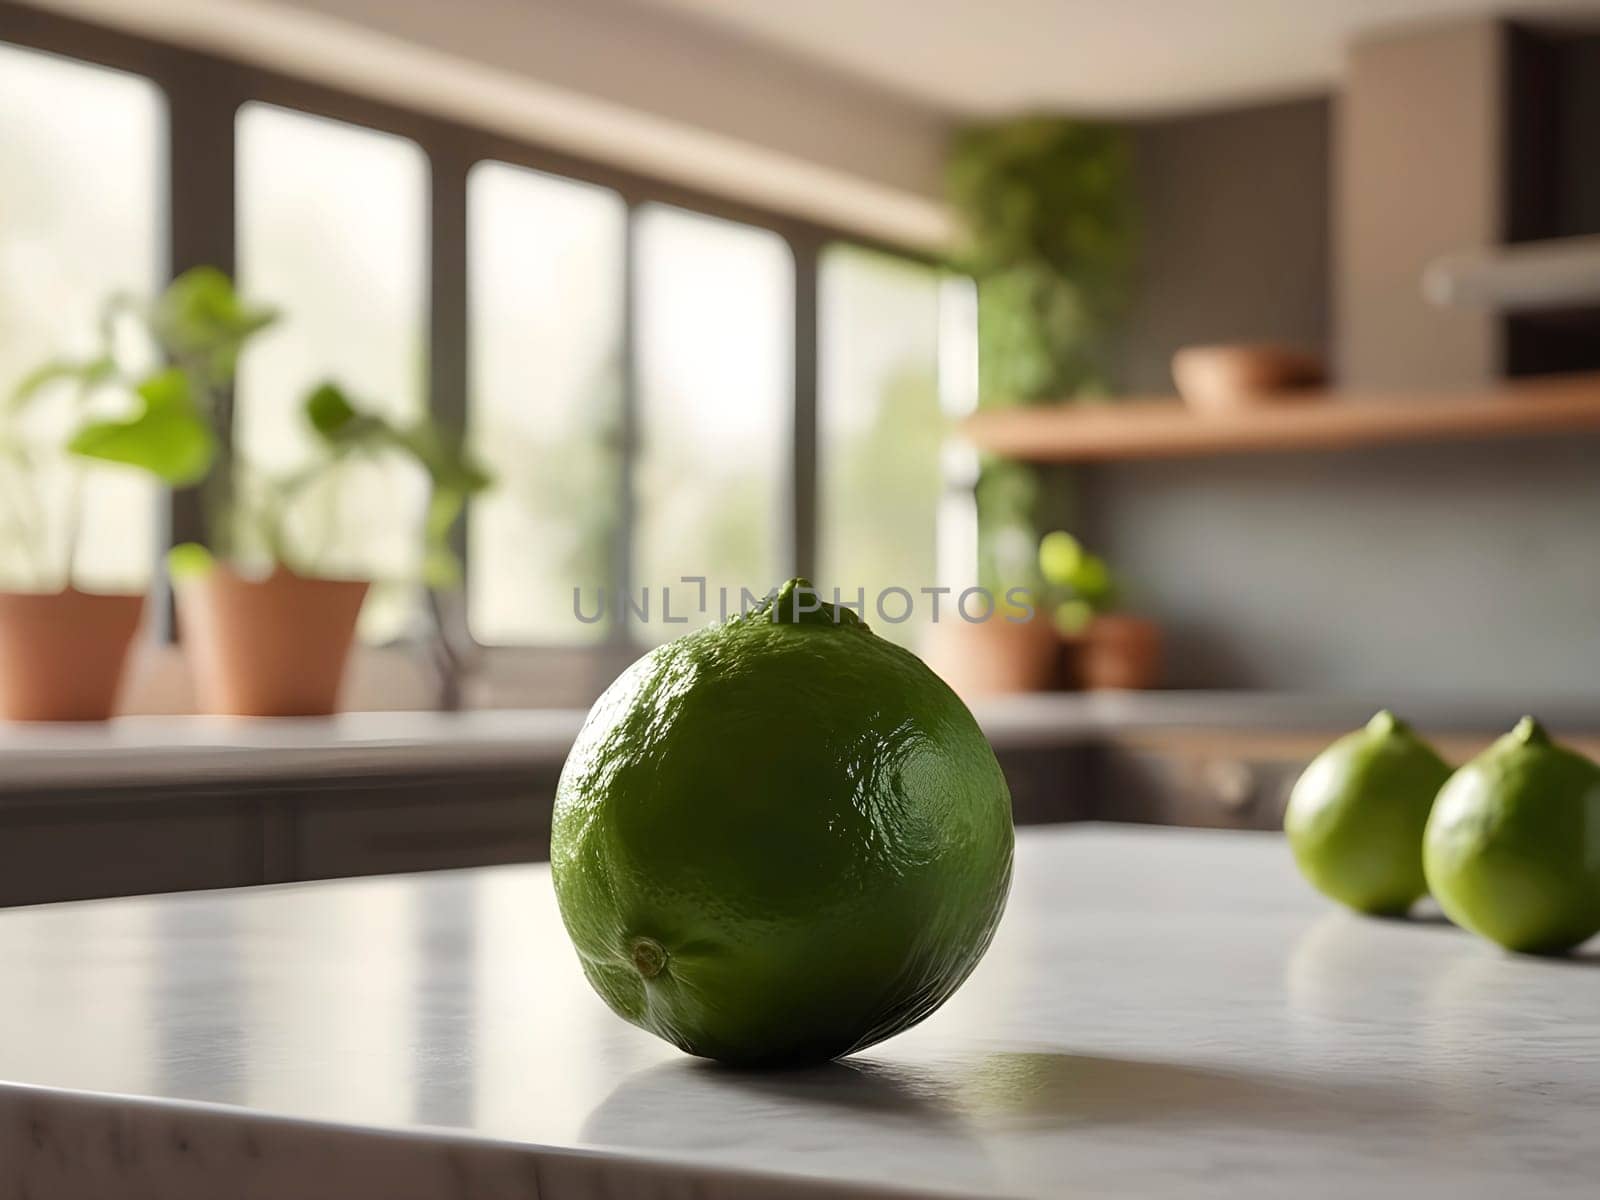 Gourmet Glow: Kaffir Lime Steals the Spotlight in a Softly Lit Afternoon Kitchen by mailos